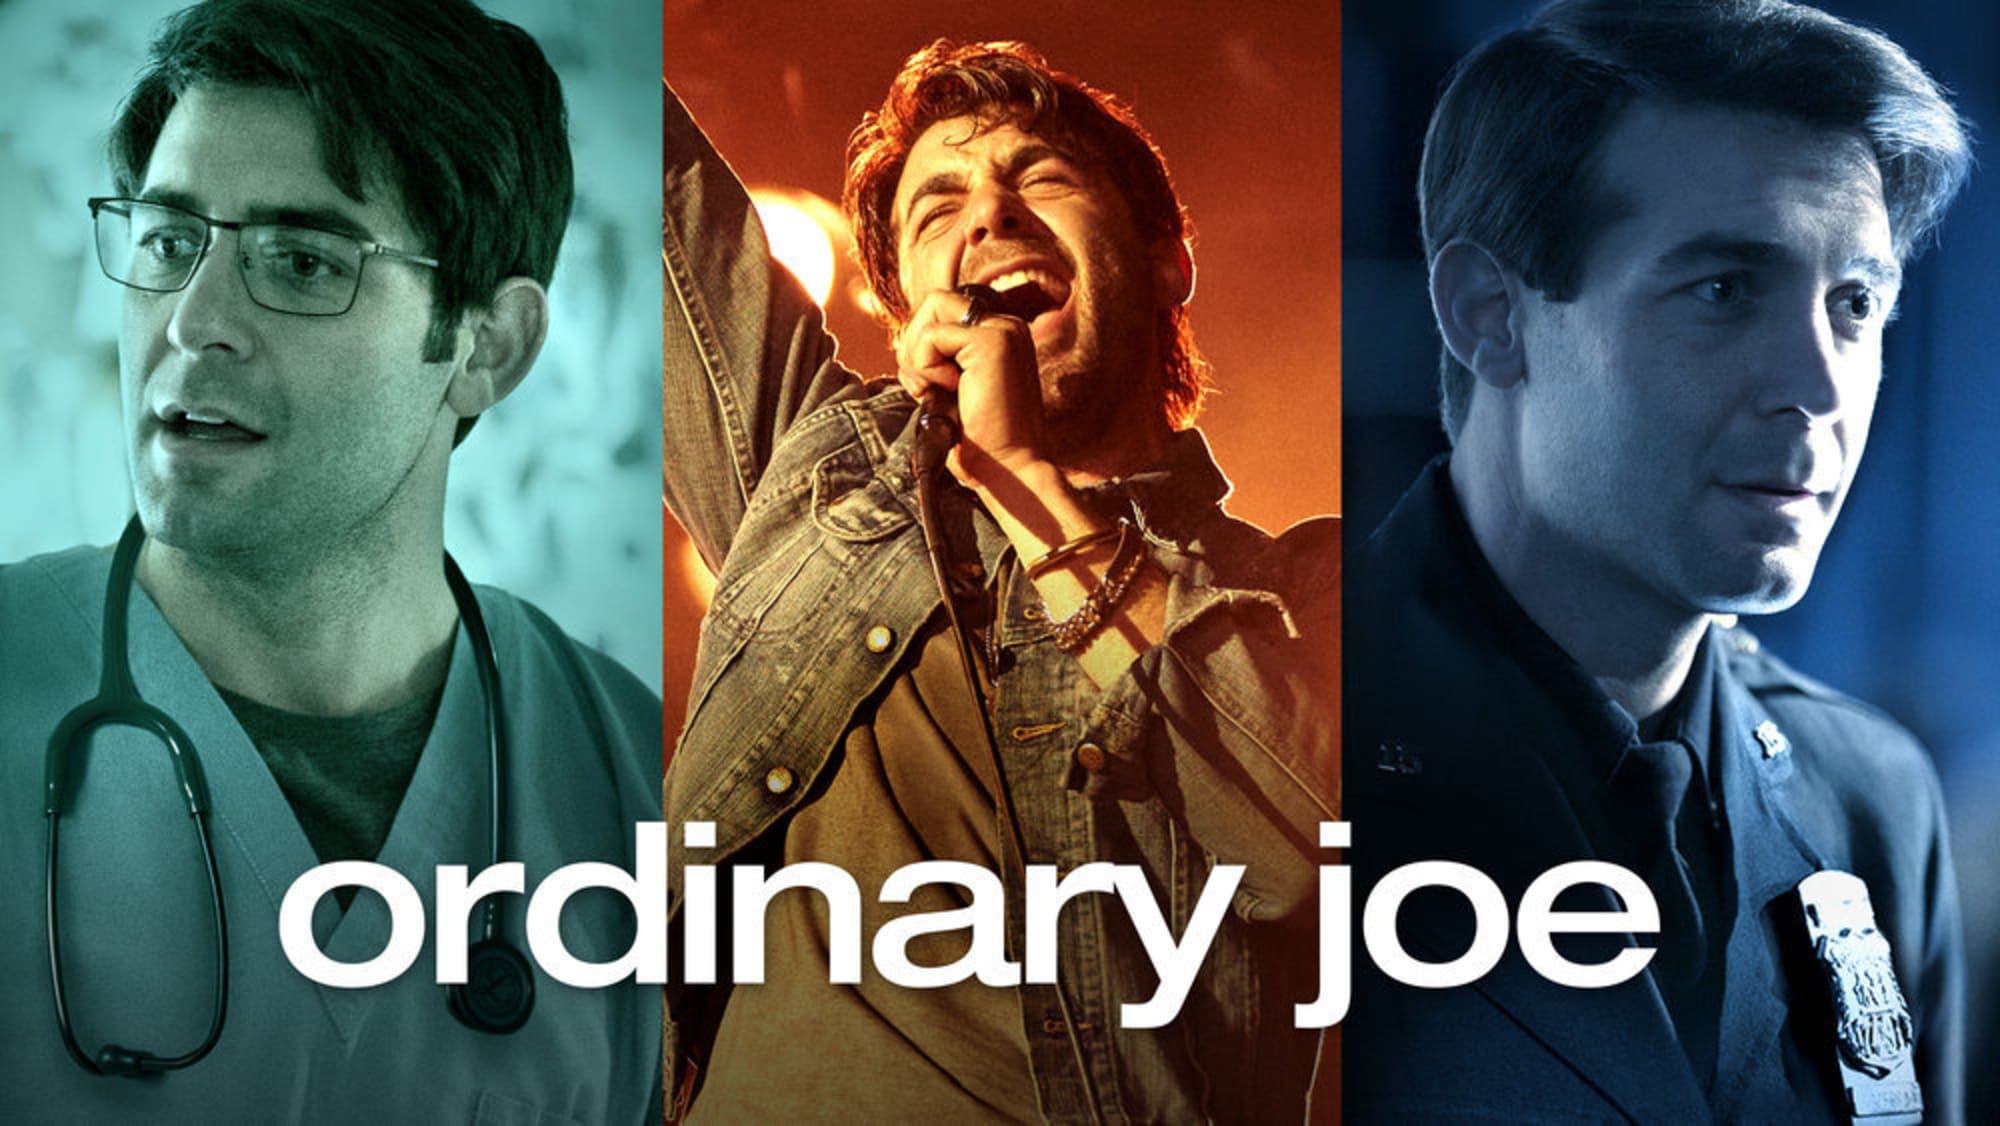 Ordinary Joe premiere date, cast, trailer, synopsis, and more